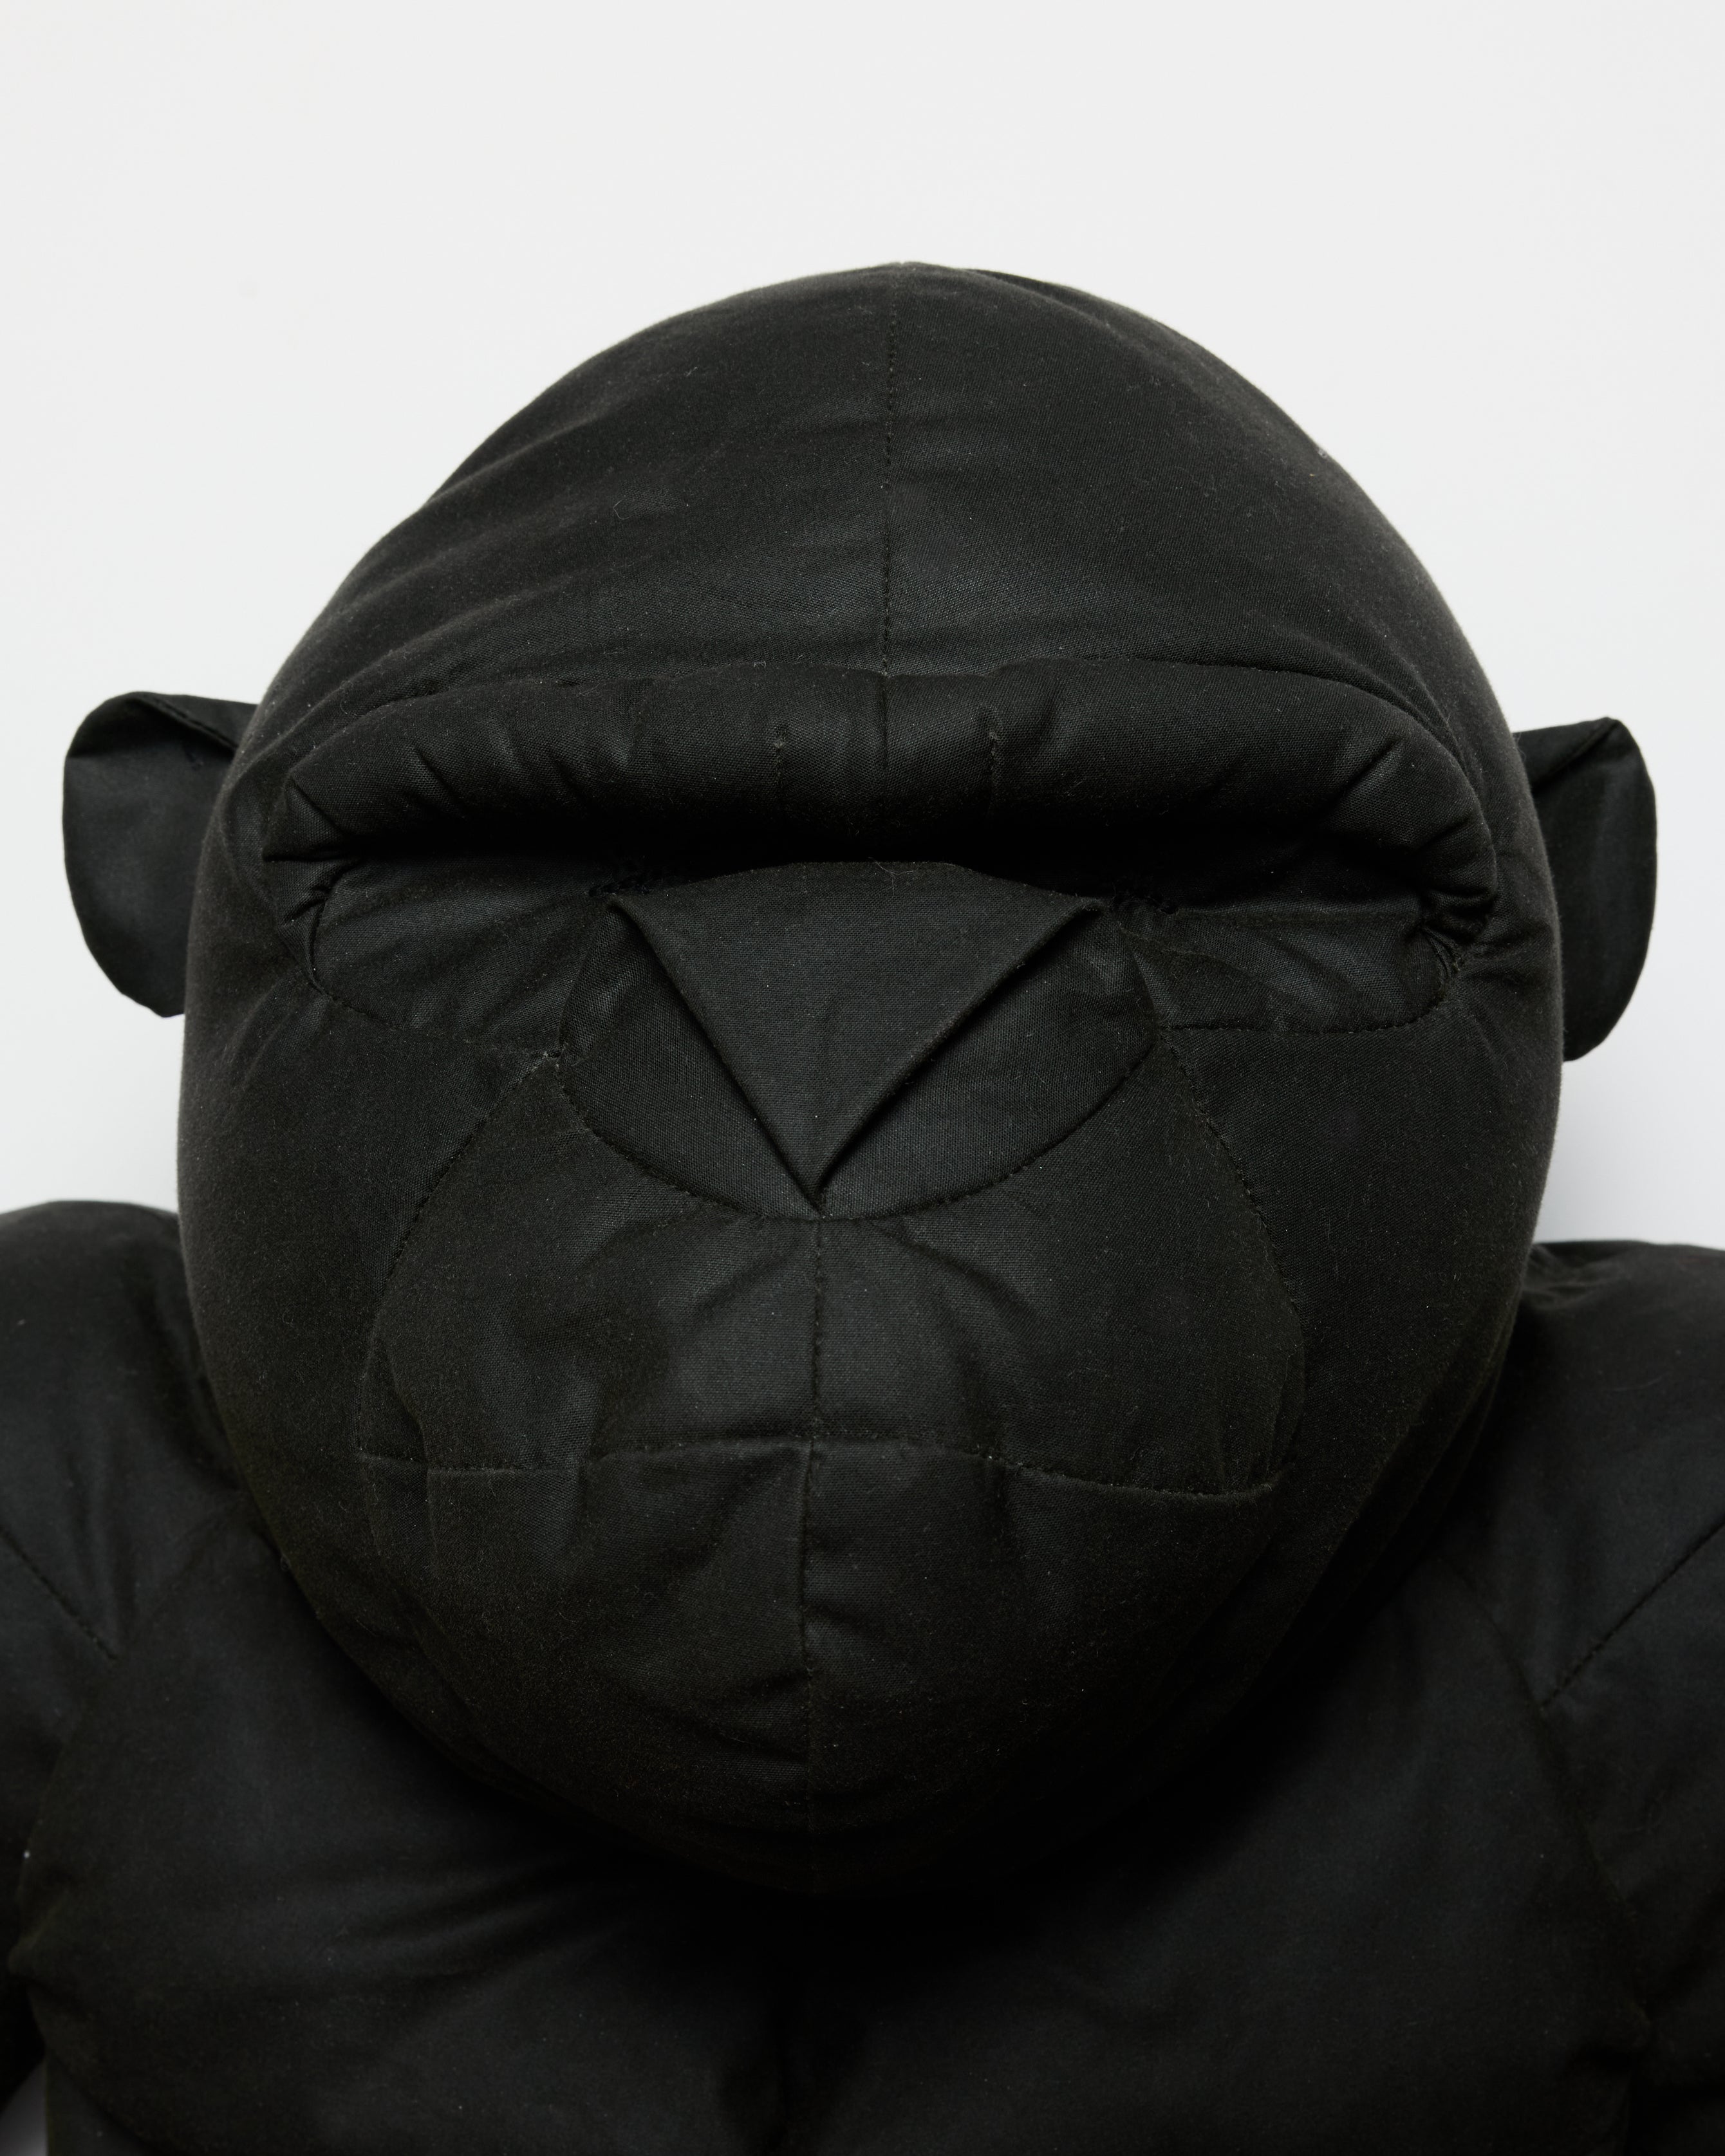 Raeburn x Constant Practice Silverback Pack - Size OS